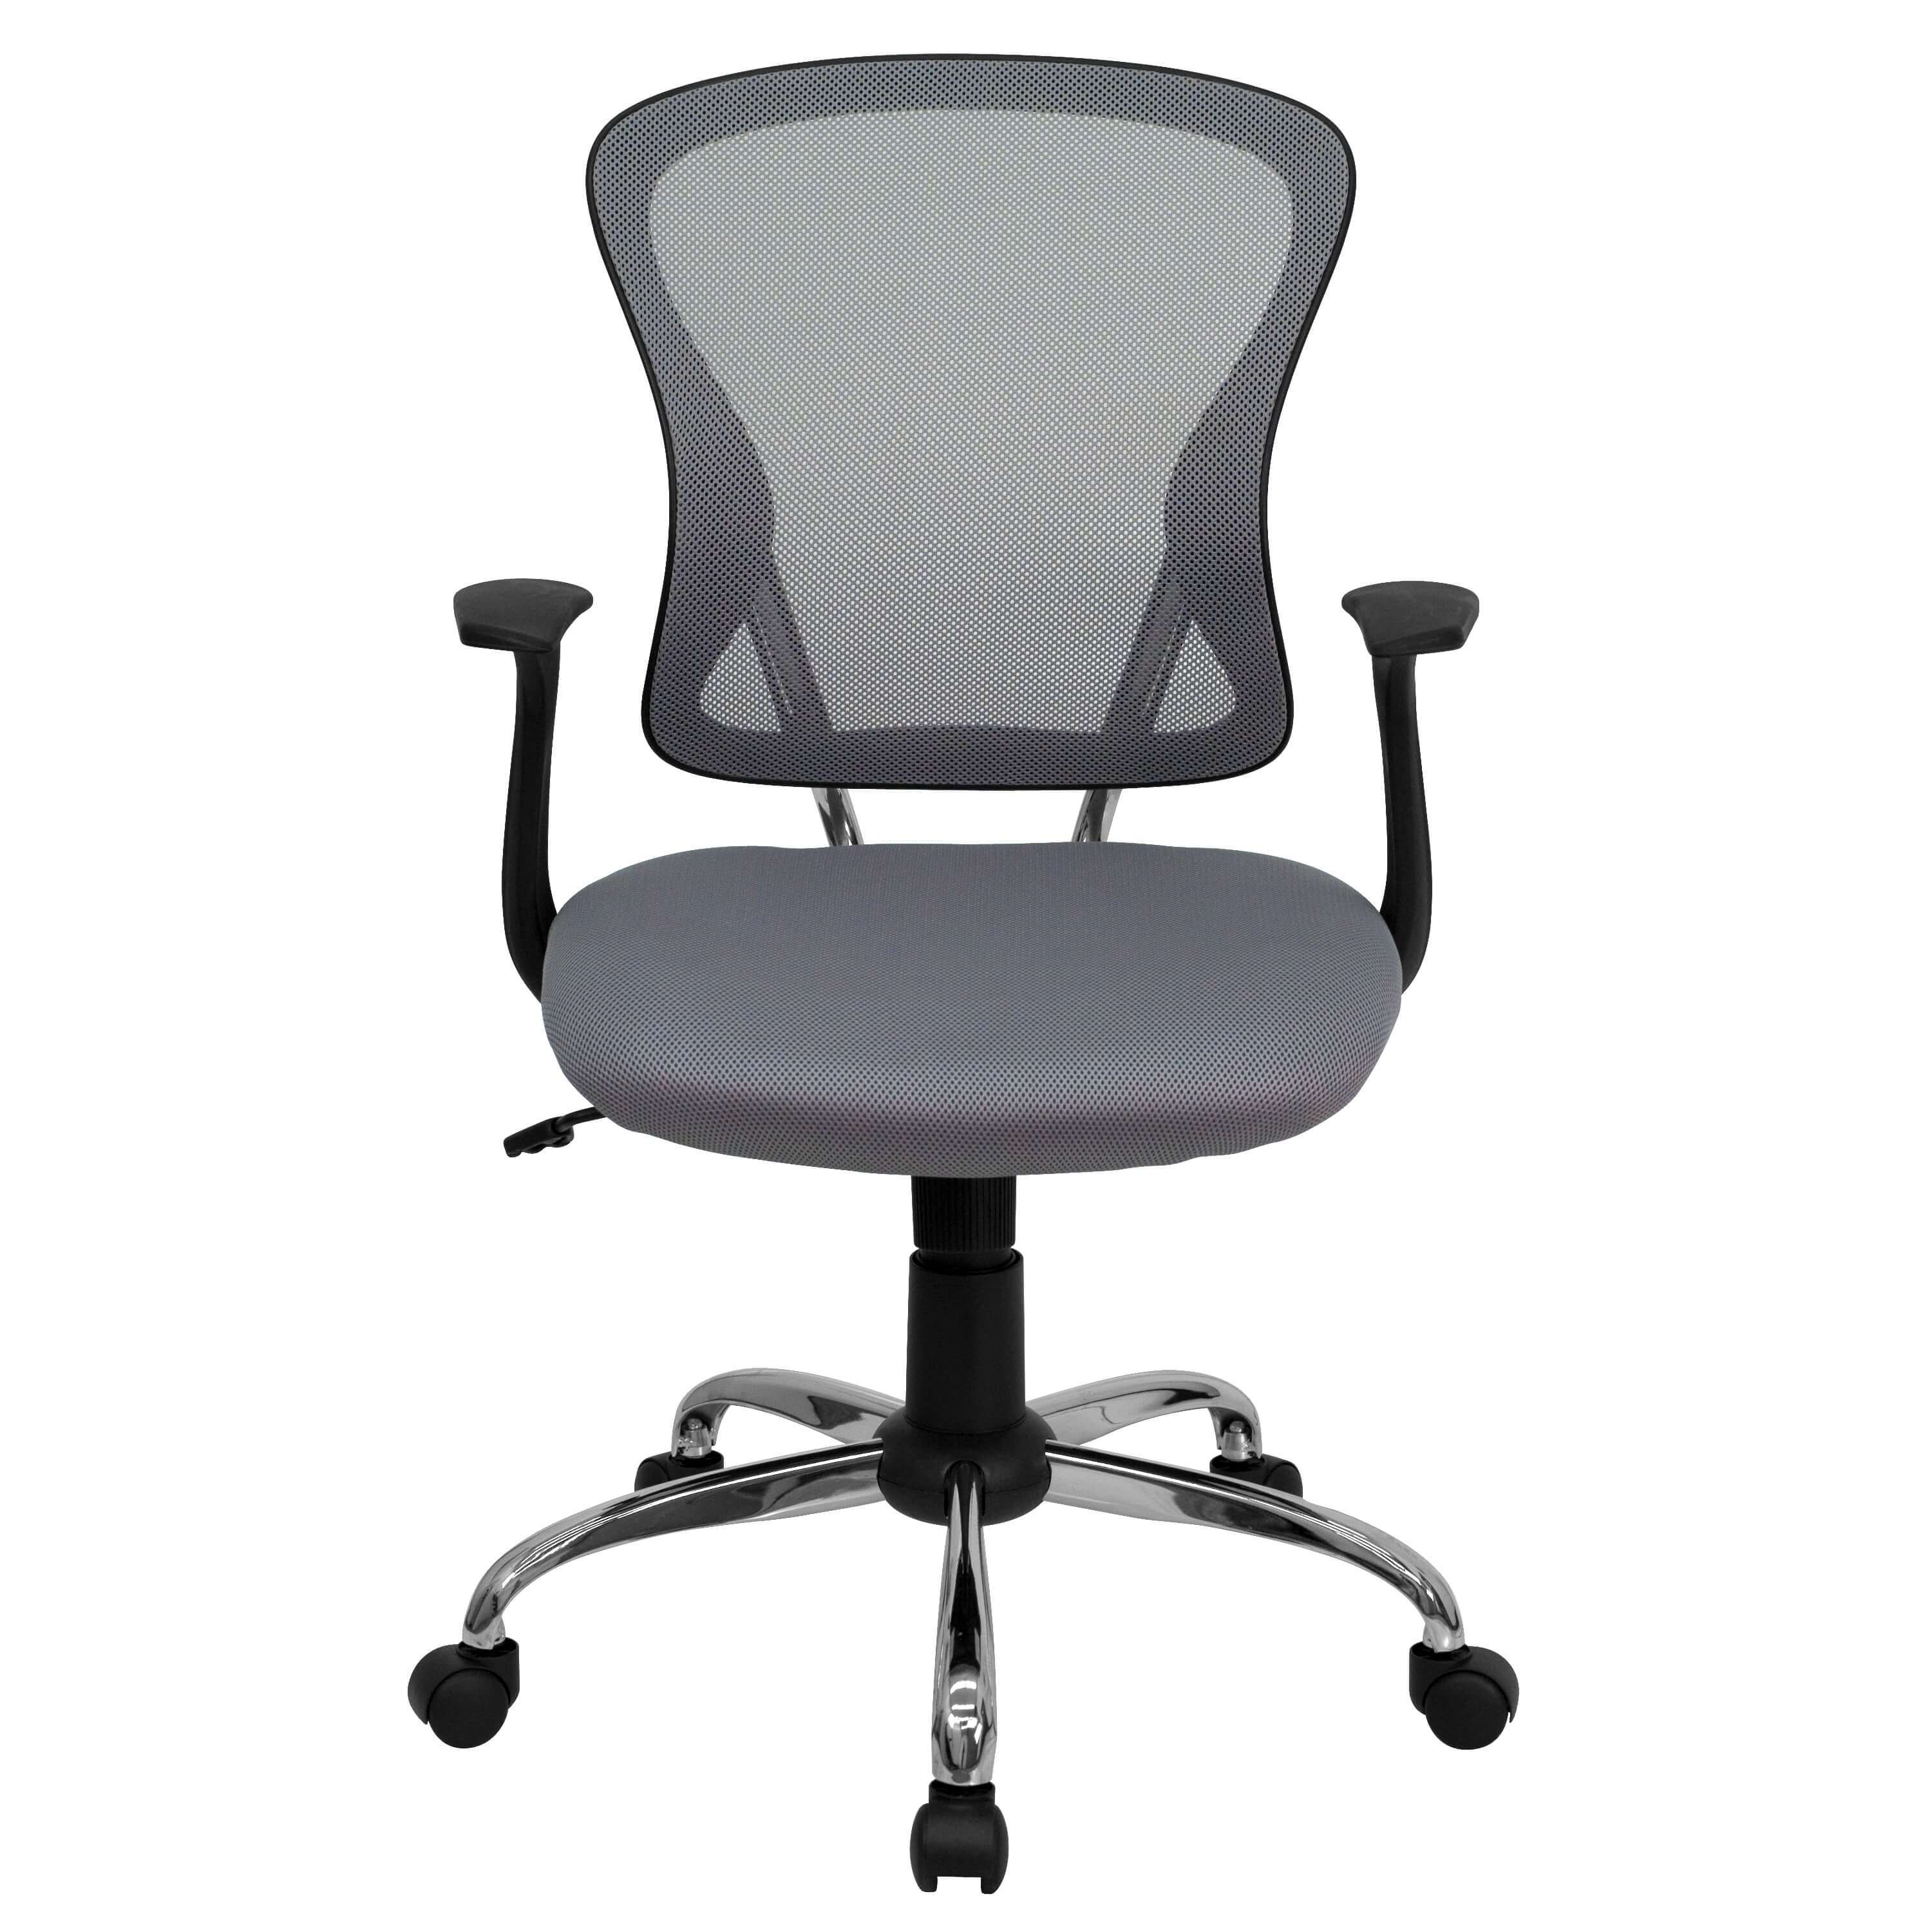 Colorful desk chairs CUB H 8369F GY GG FLA